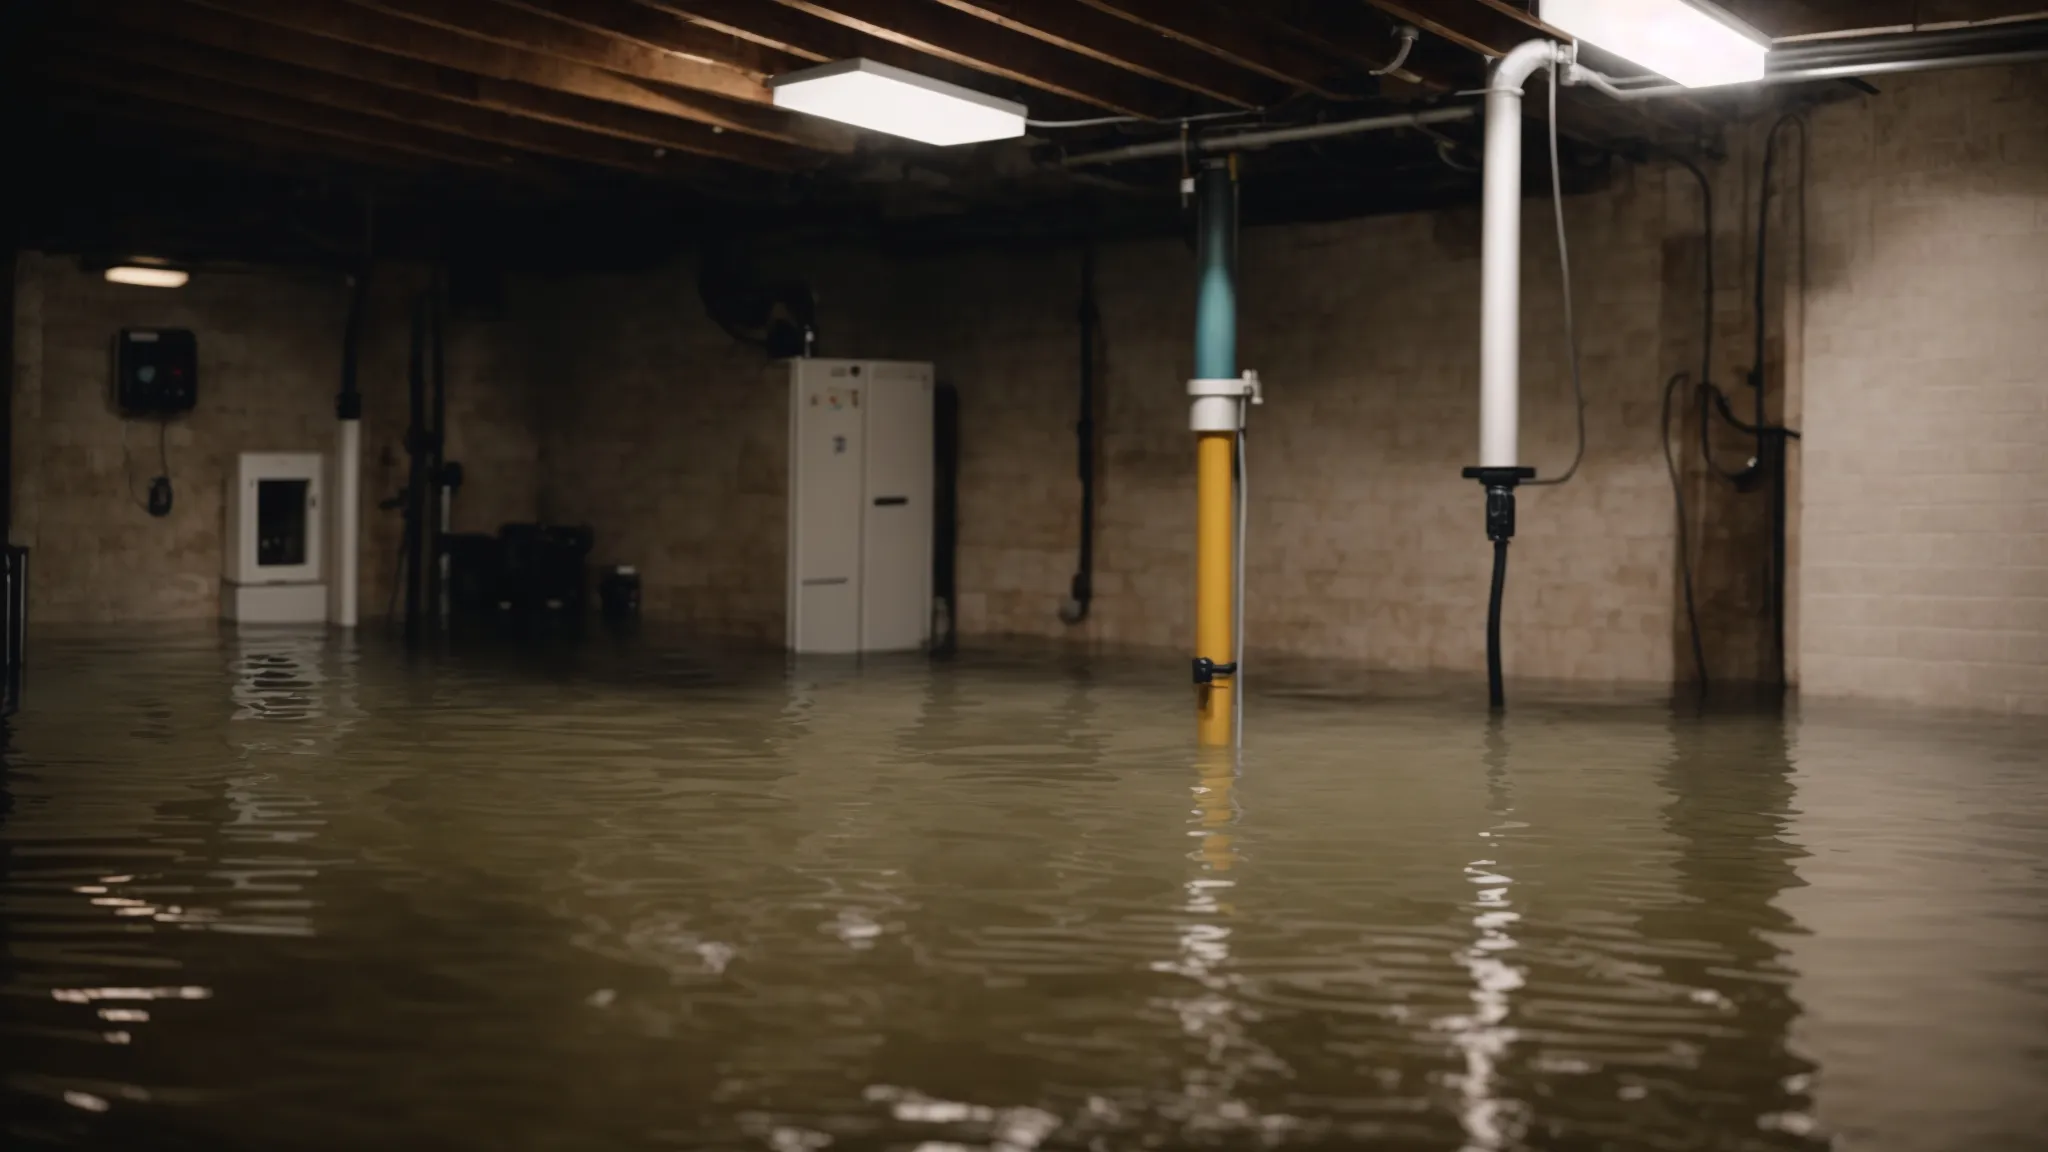 a flooded basement with a sump pump installation in the corner, water visibly being pumped out.